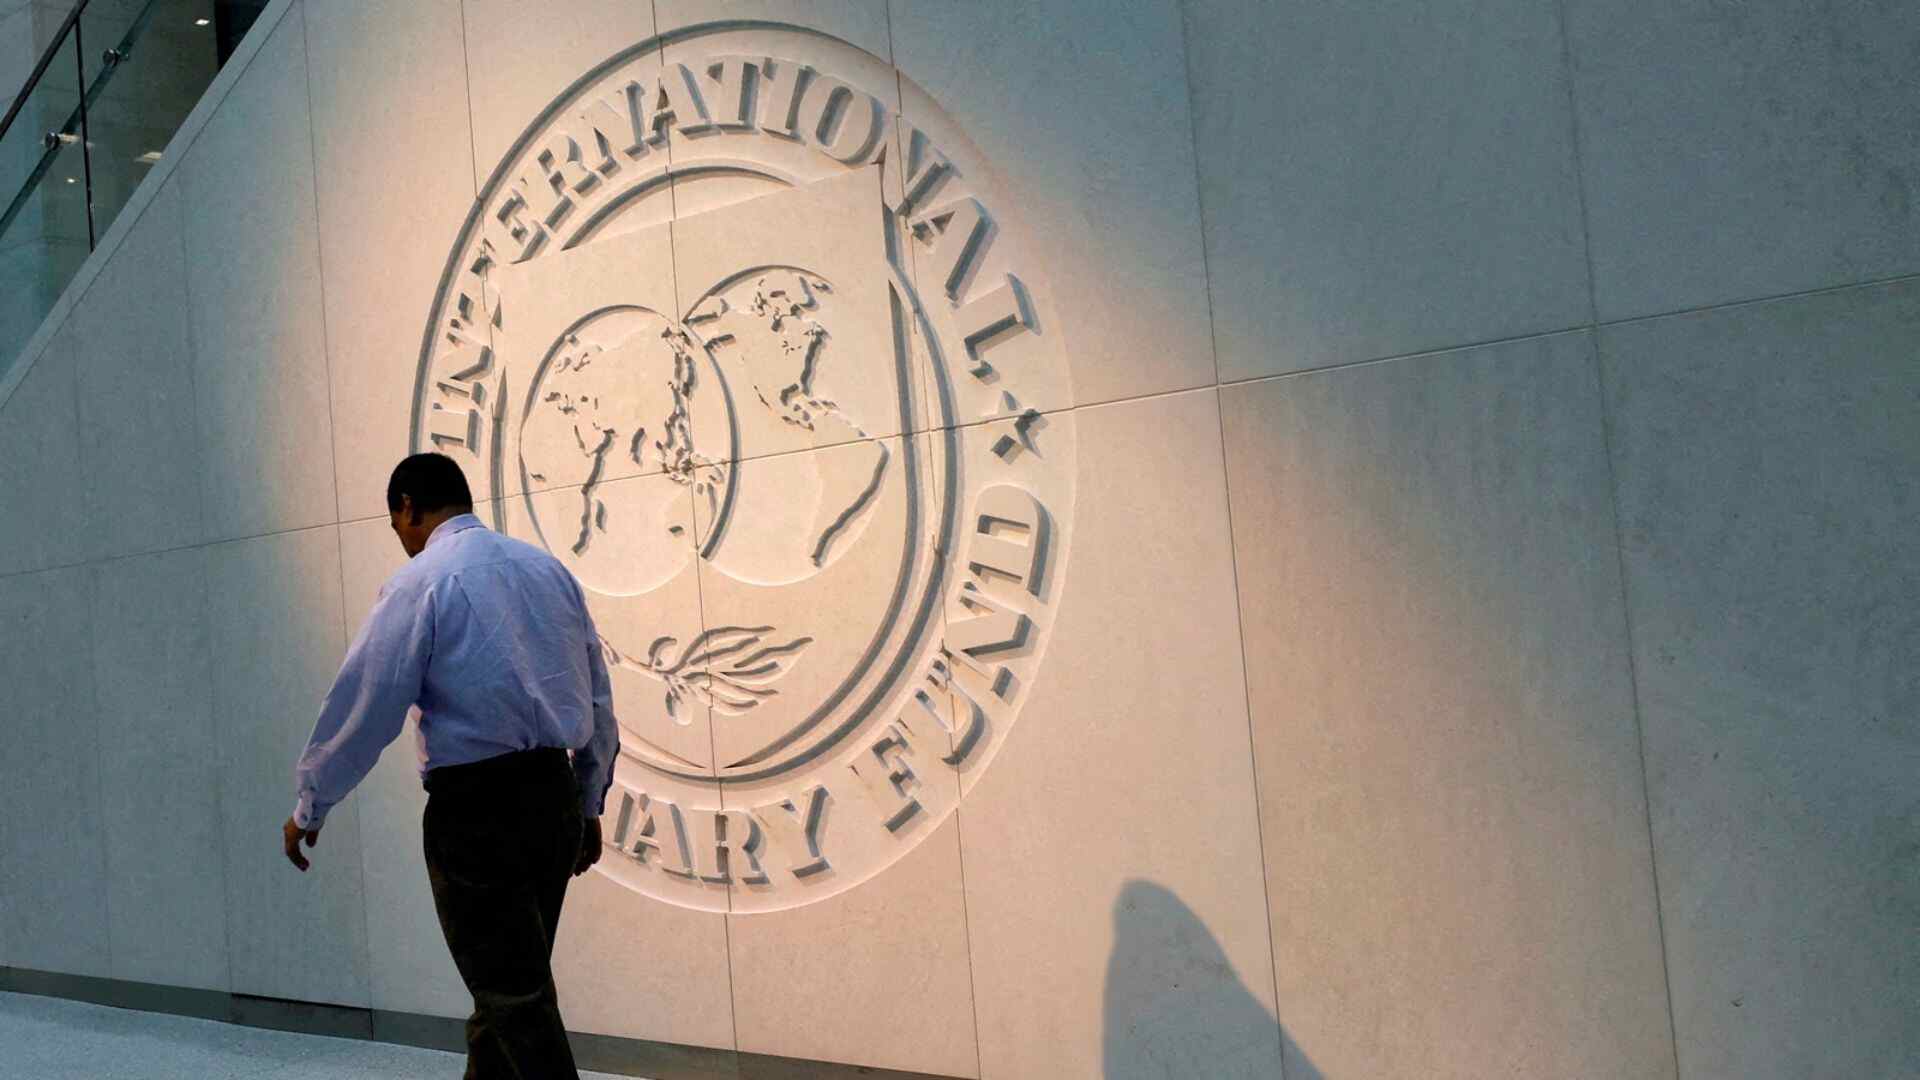 Pakistan formally requests an IMF bailout package ranging from USD 6 to 8 billion